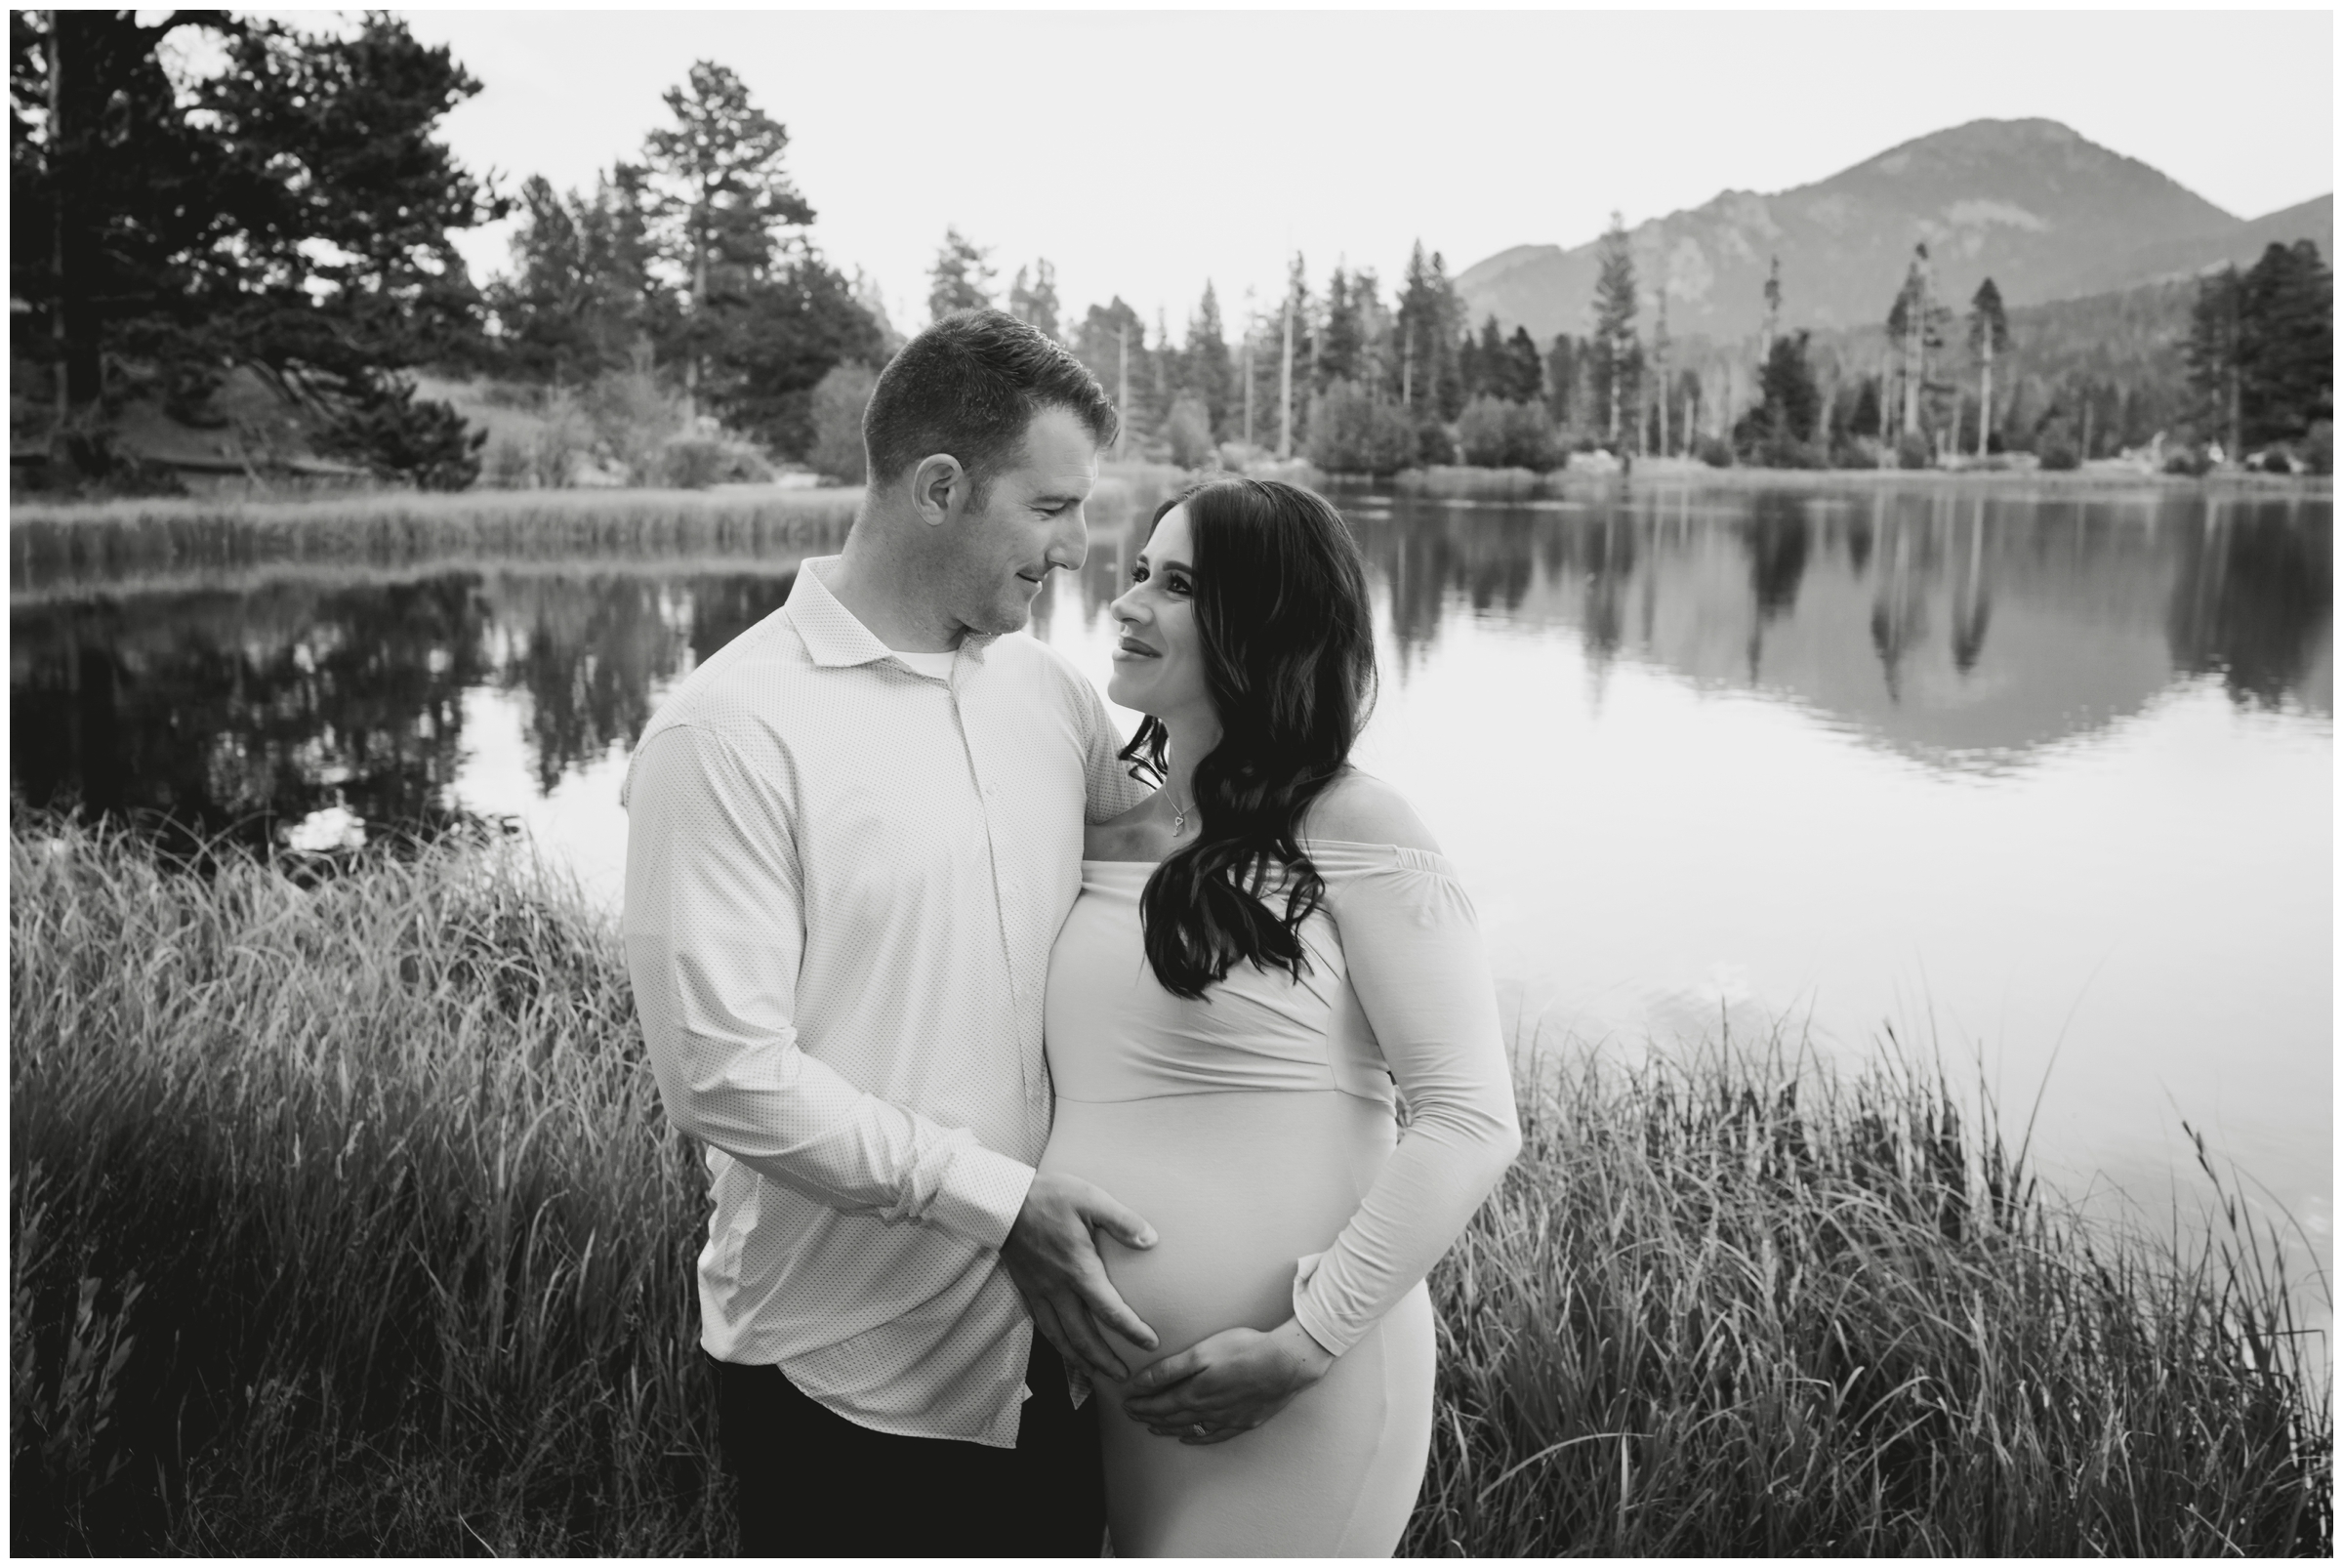 Summer maternity pictures at Sprague Lake by Colorado photographer Plum Pretty Photography